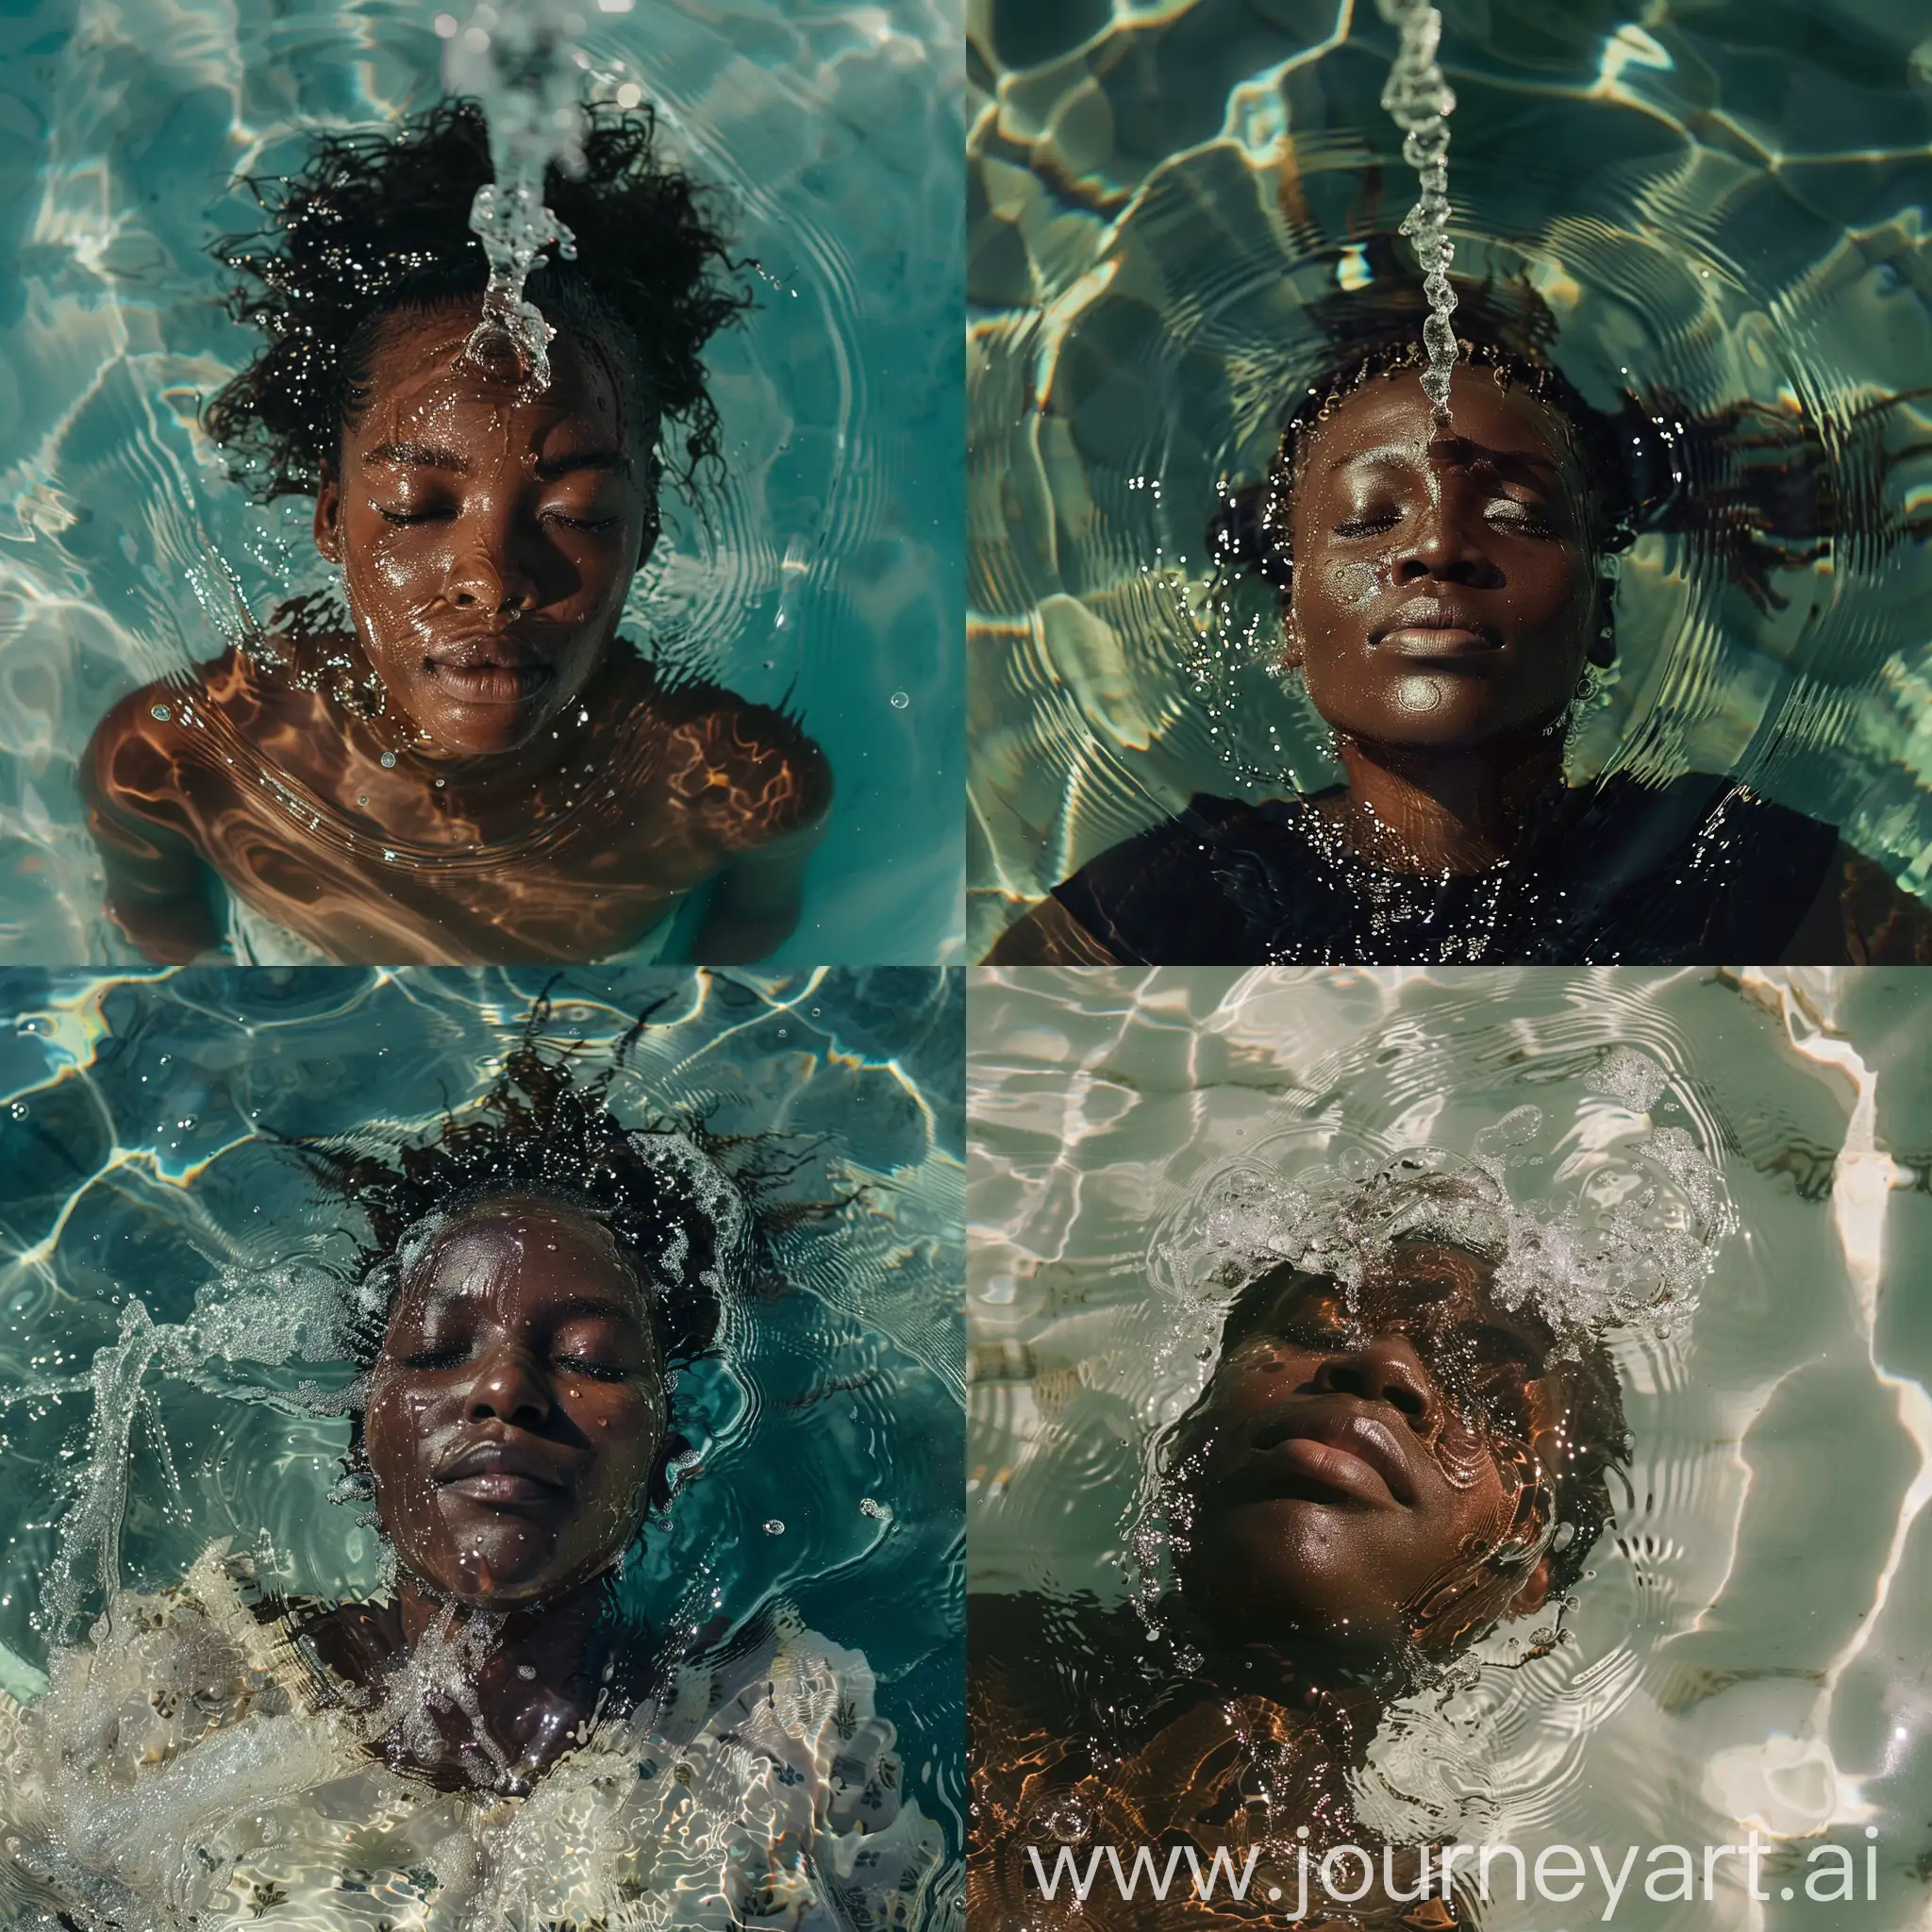 Upclose erial view of an African woman floating on water On a sunny day. There’s water flowing from her face as well.